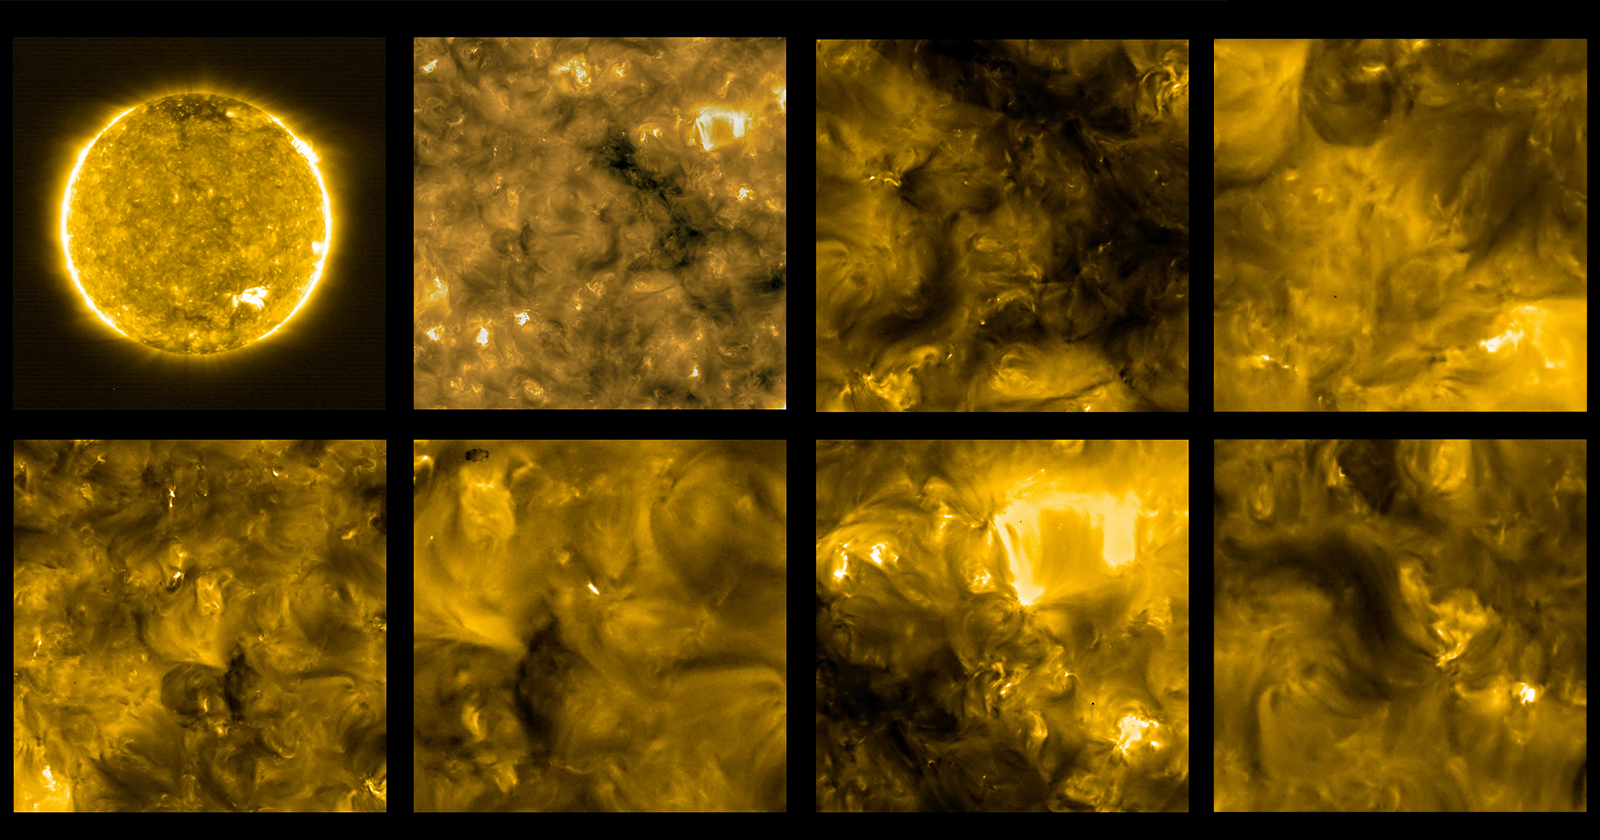 New Solar Orbiter Sends Back Closest Pictures Ever Taken of the Sun